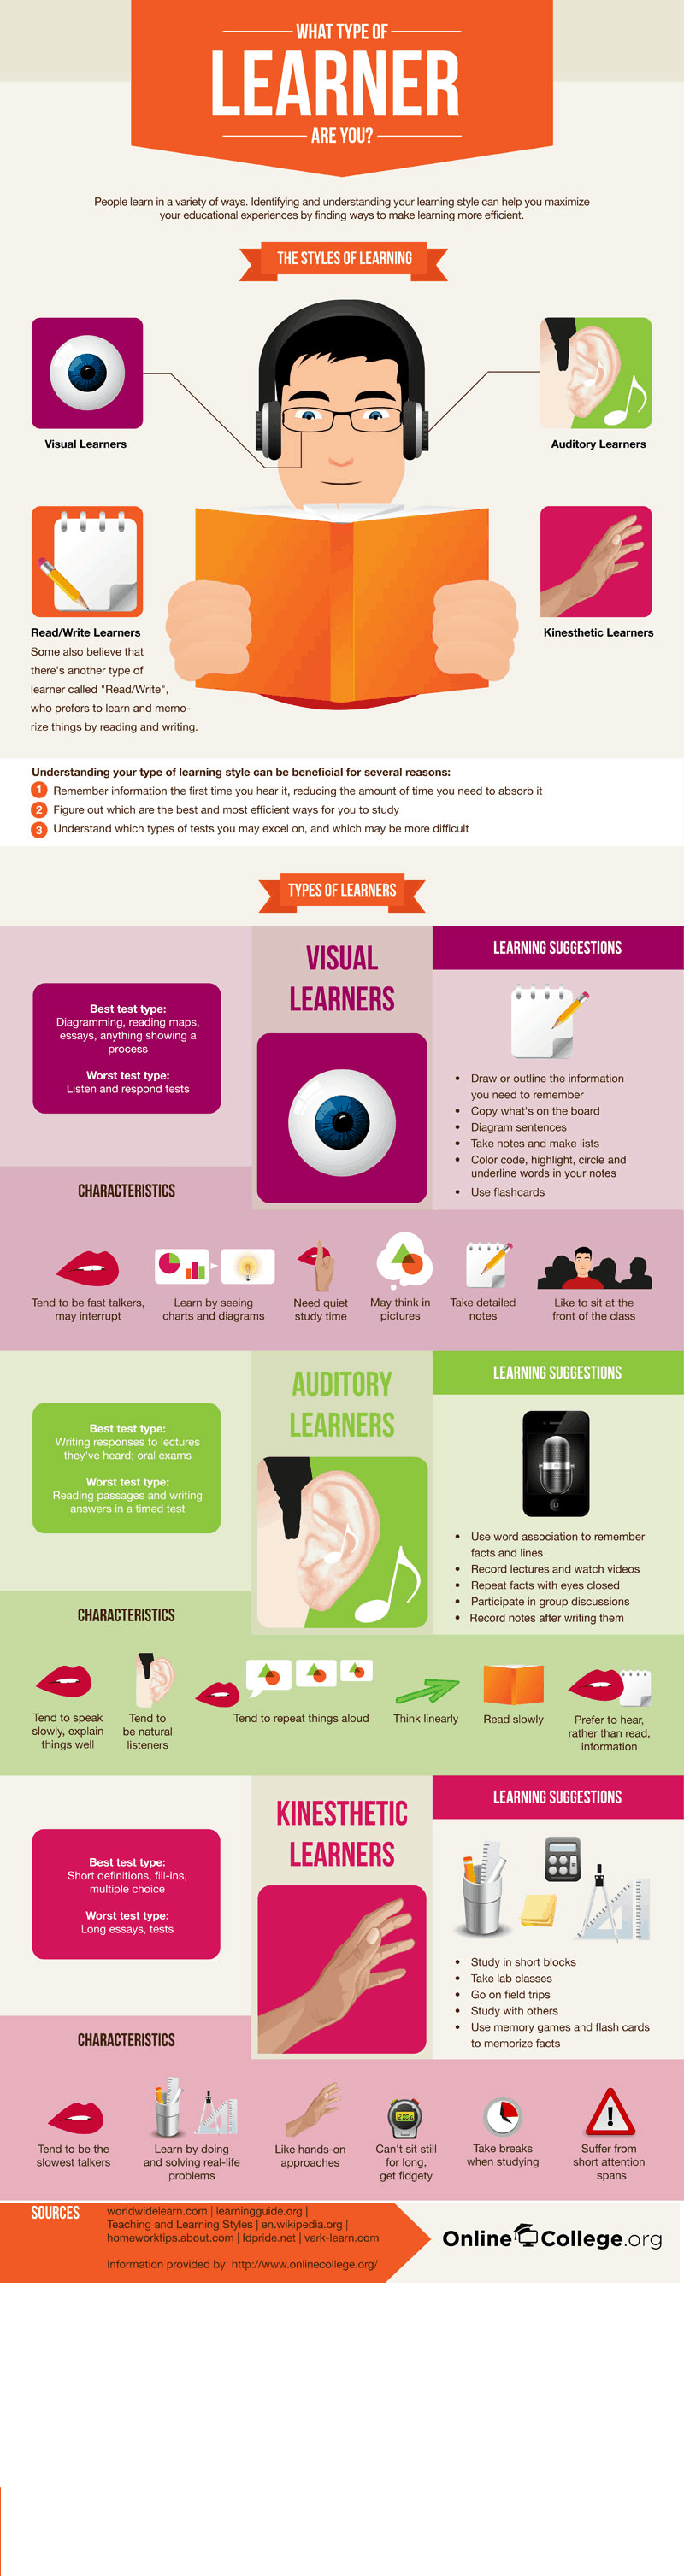 Discover what type of learner you are